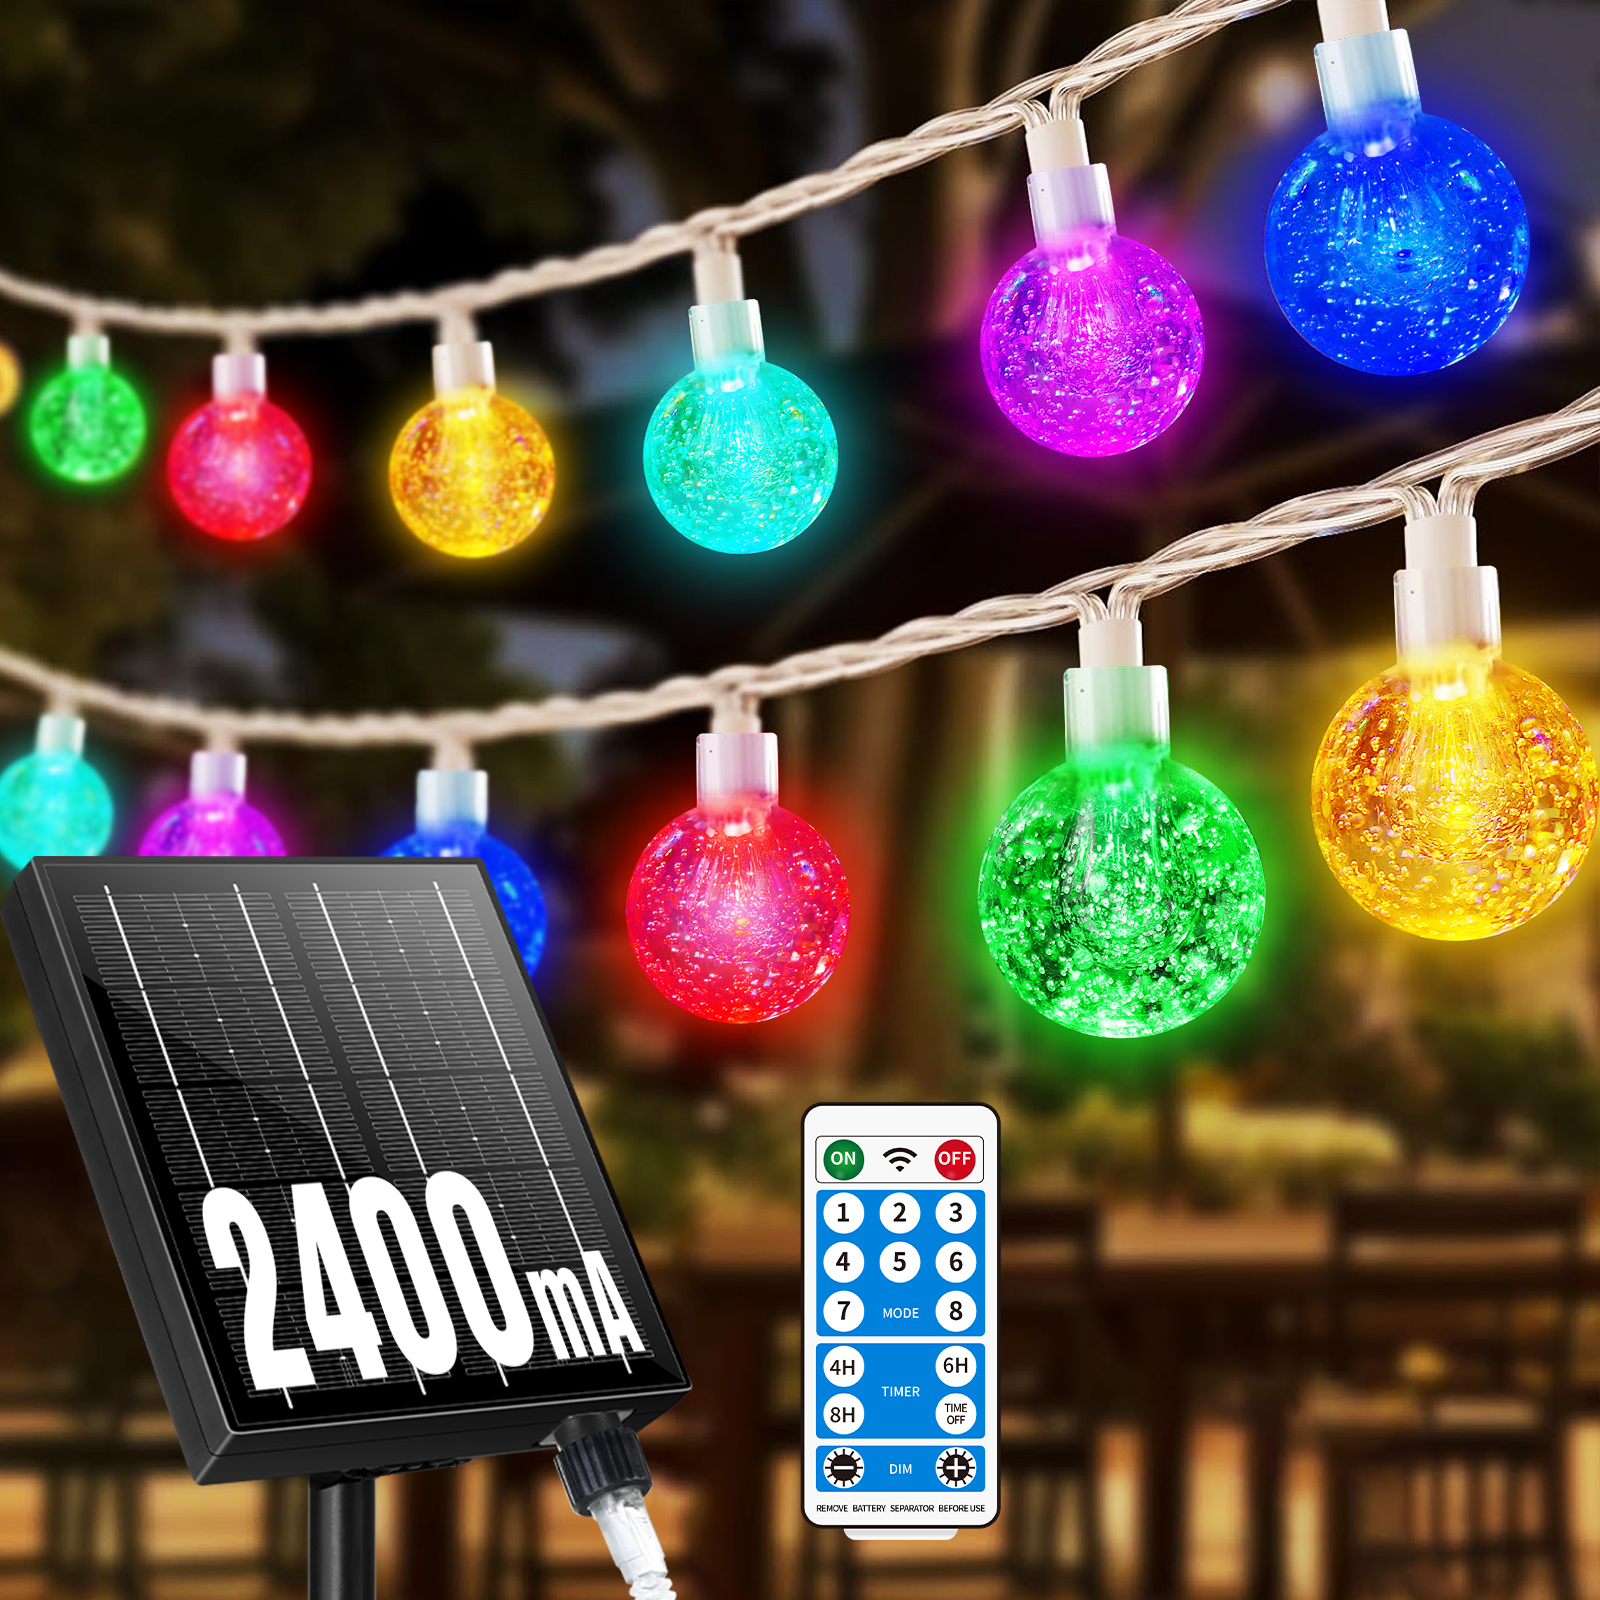 

Solar String Lights For Outside - 39ft 60 Led Large Crystal Globe String Lights With Remote, Multi-colored 8 Modes Solar Powered Christmas Lights Outdoor For Garden Wedding Party Decor(2pcs)